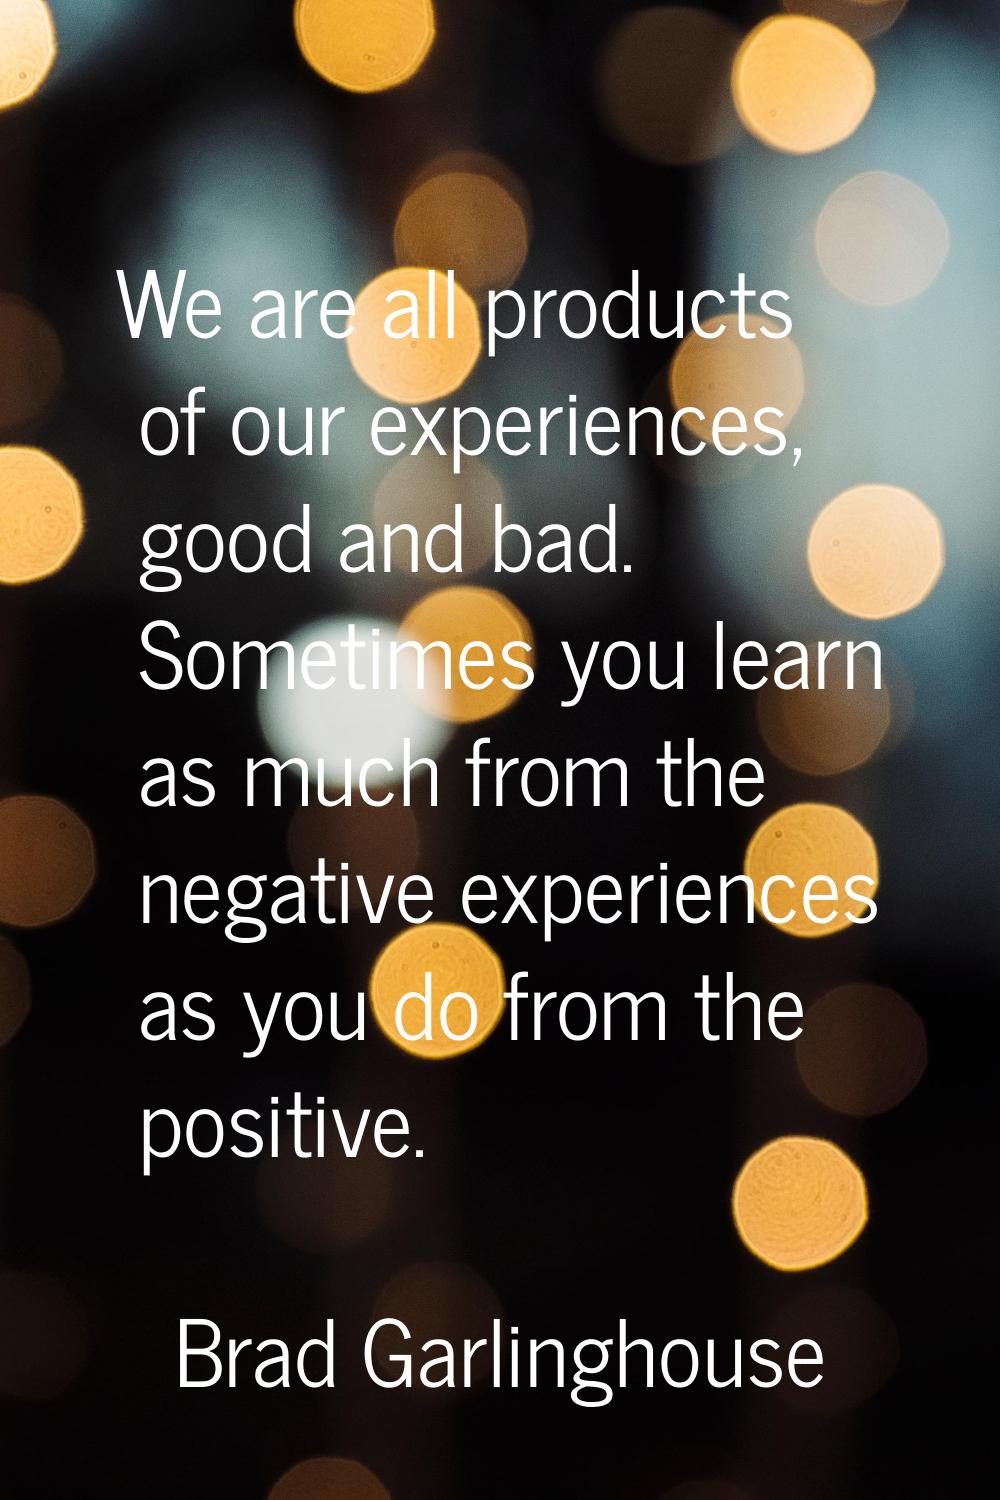 We are all products of our experiences, good and bad. Sometimes you learn as much from the negative